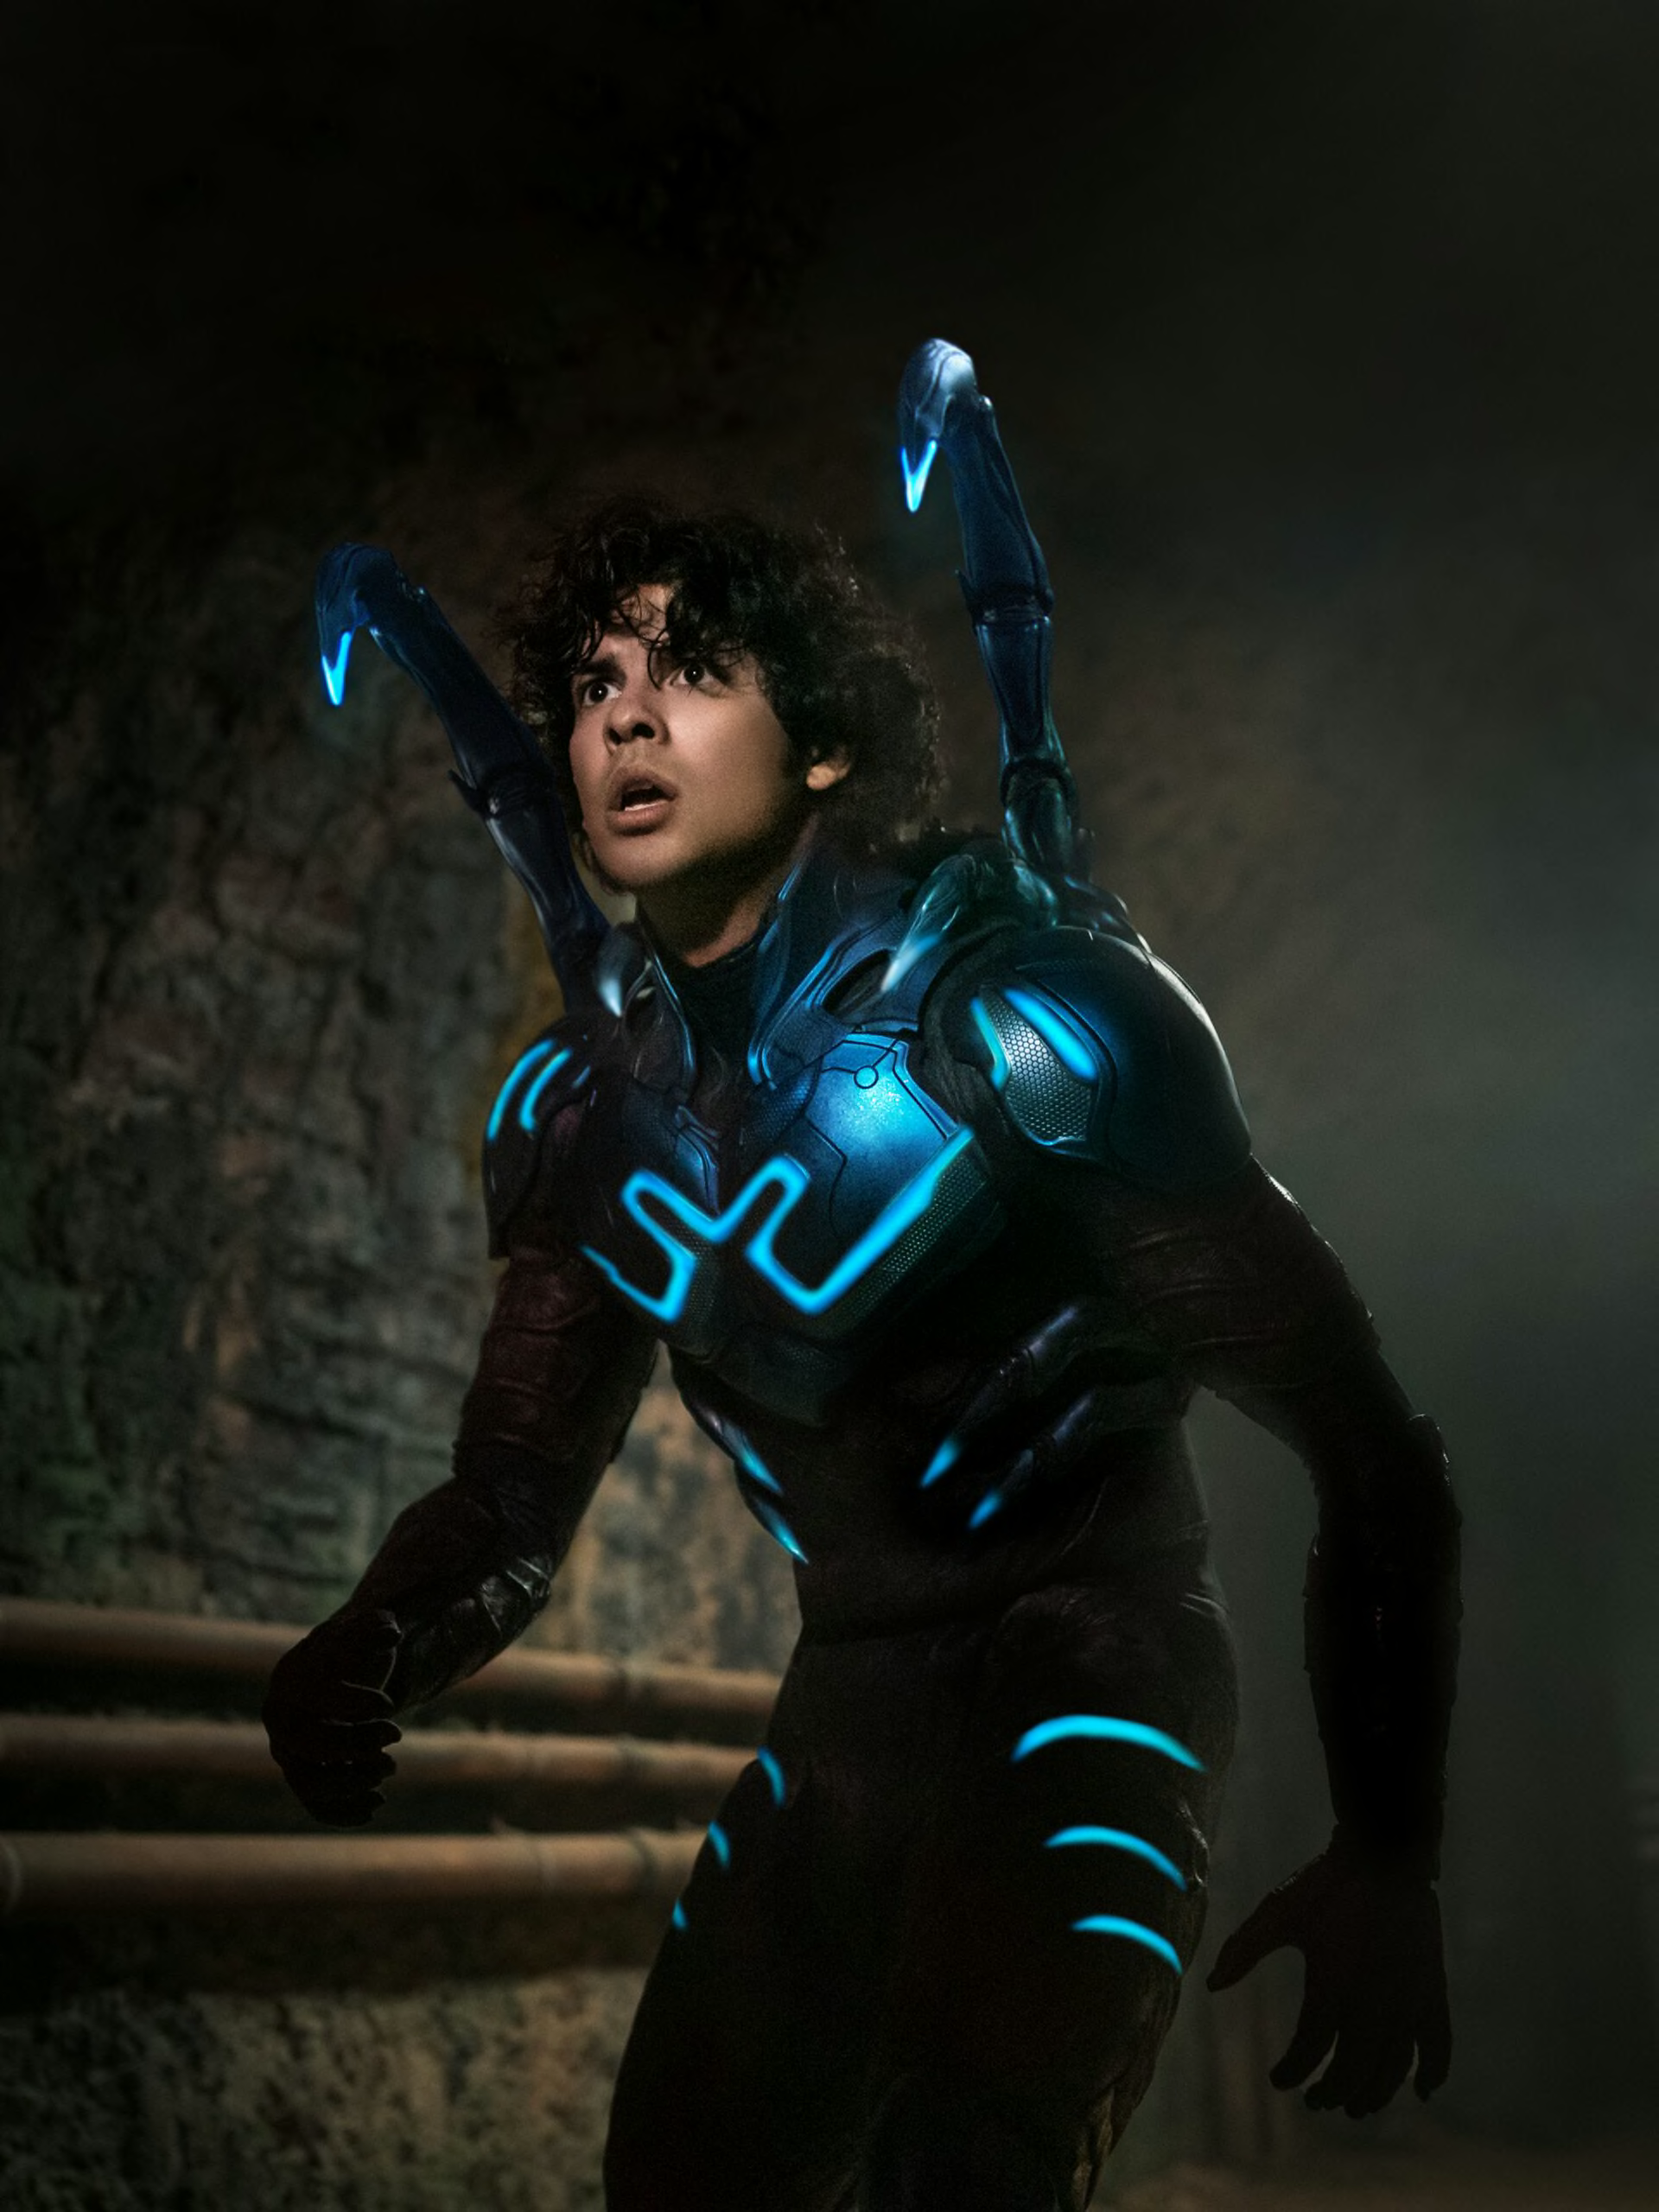 Blue Beetle Rated Above Most DCEU Films by Critics